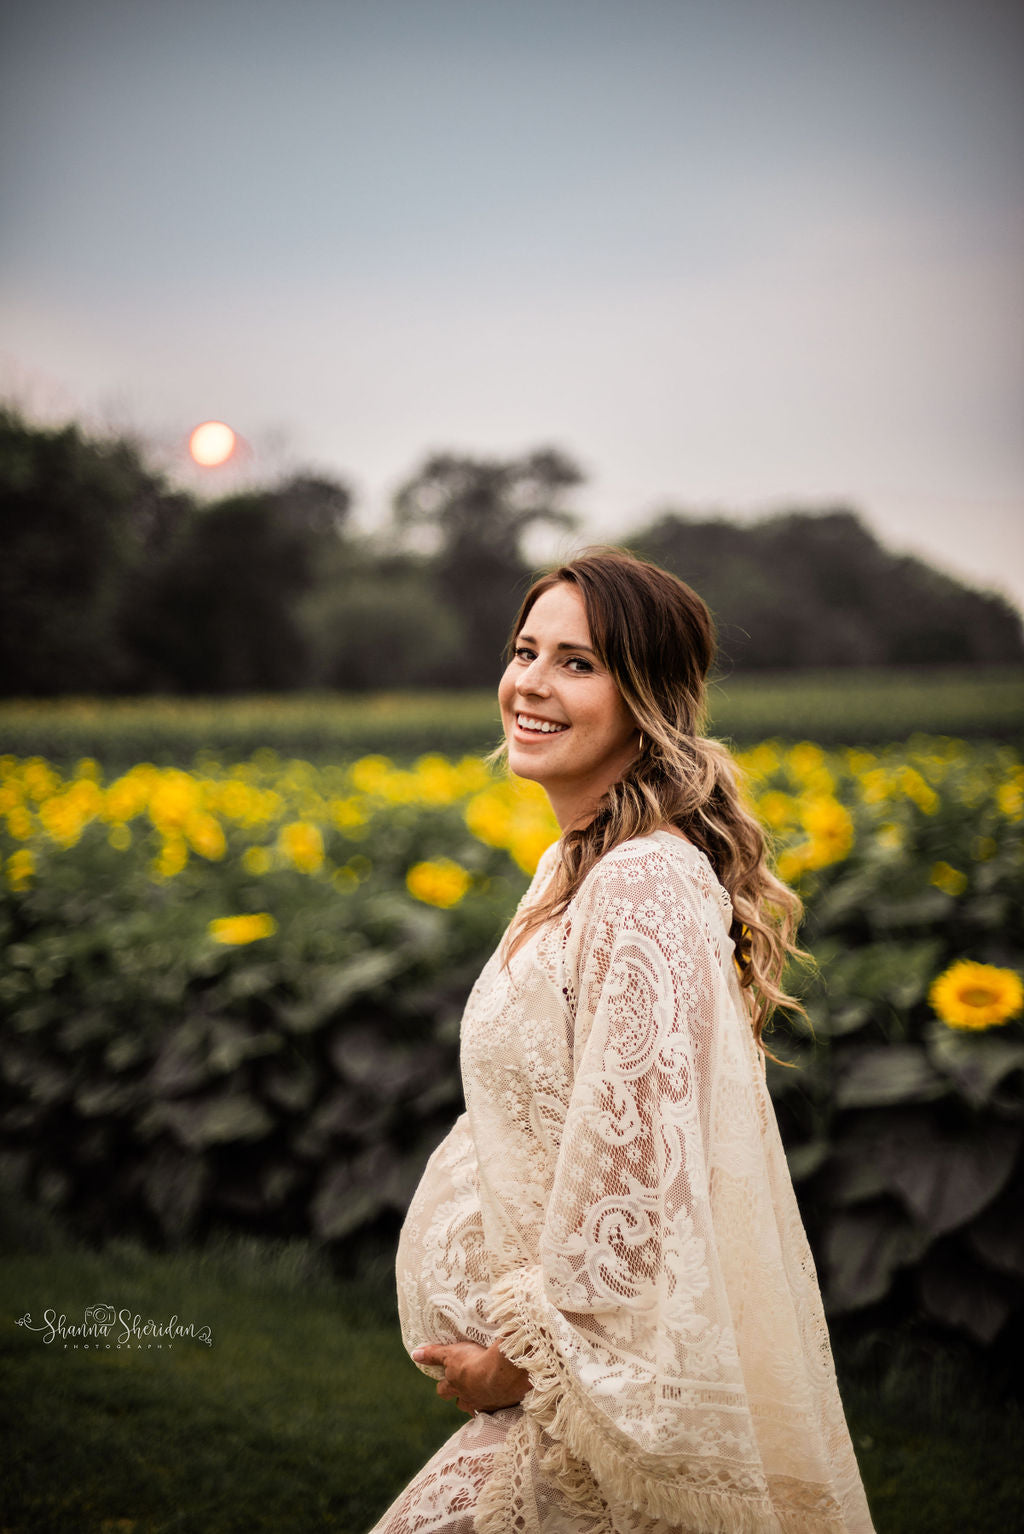 Boho Lace Maternity Gown with Tassels - maternity photoshoot dress